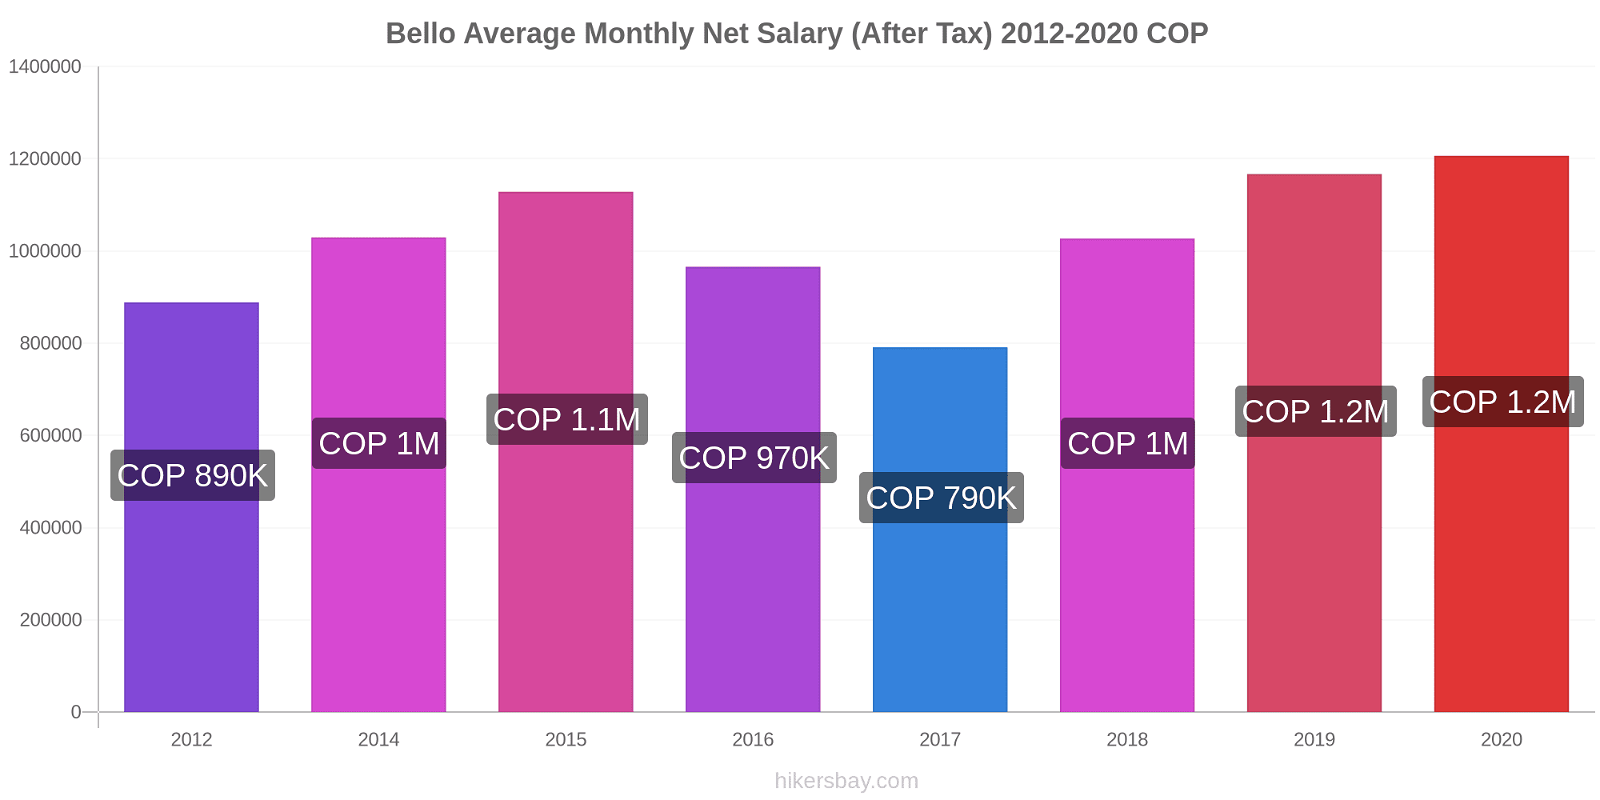 Bello price changes Average Monthly Net Salary (After Tax) hikersbay.com